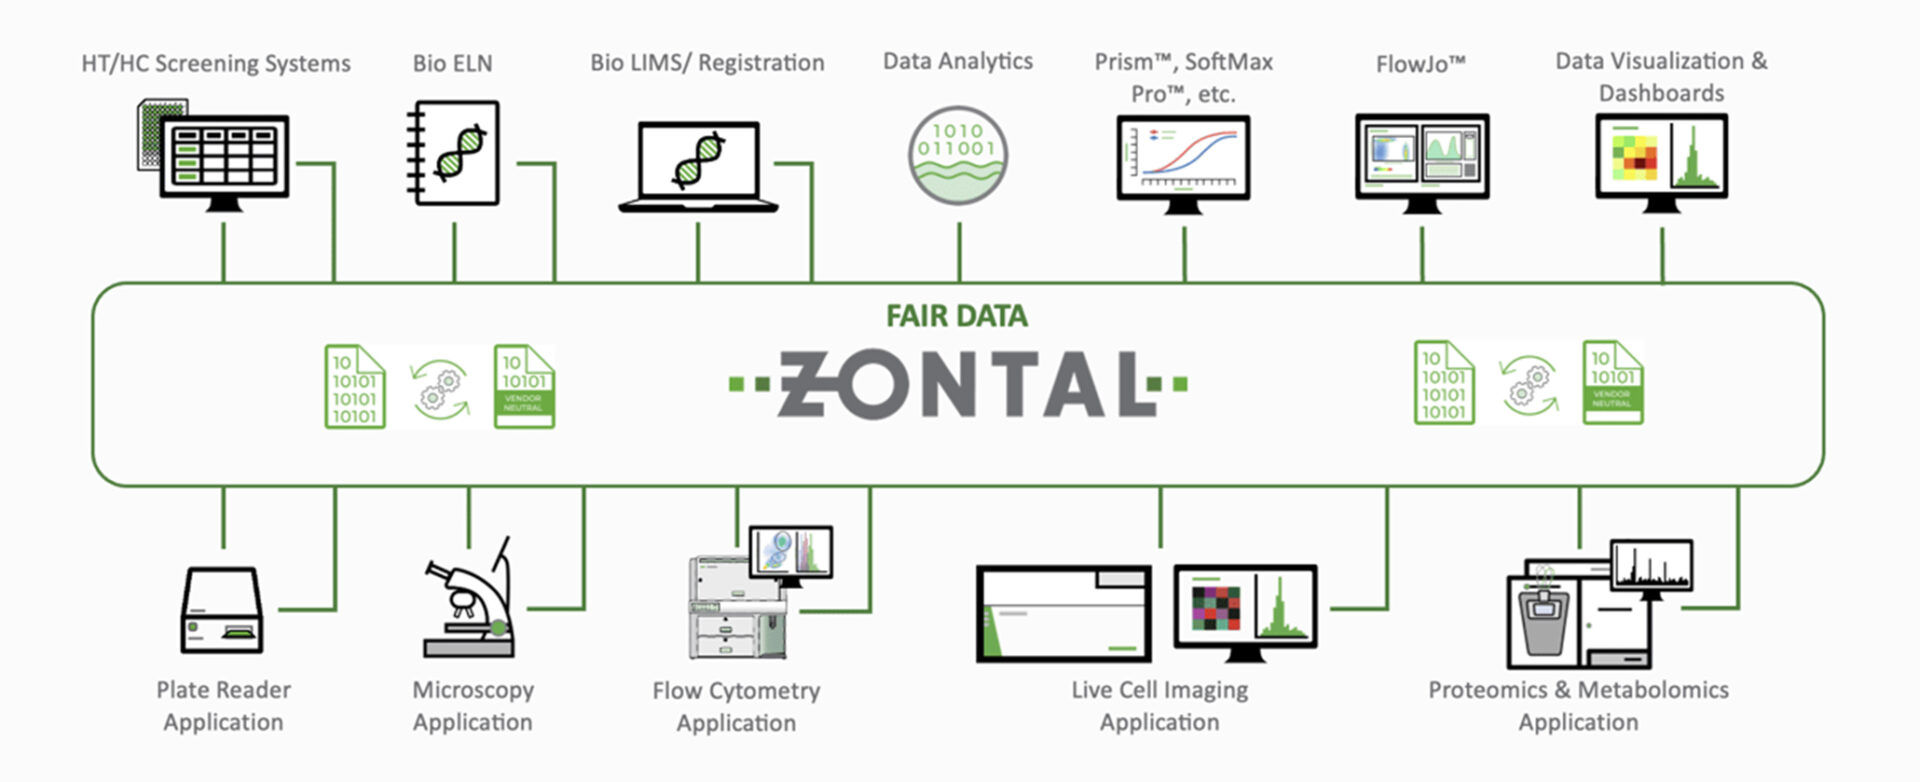 Bruker acquires ZONTAL to advance the digital lab transformation